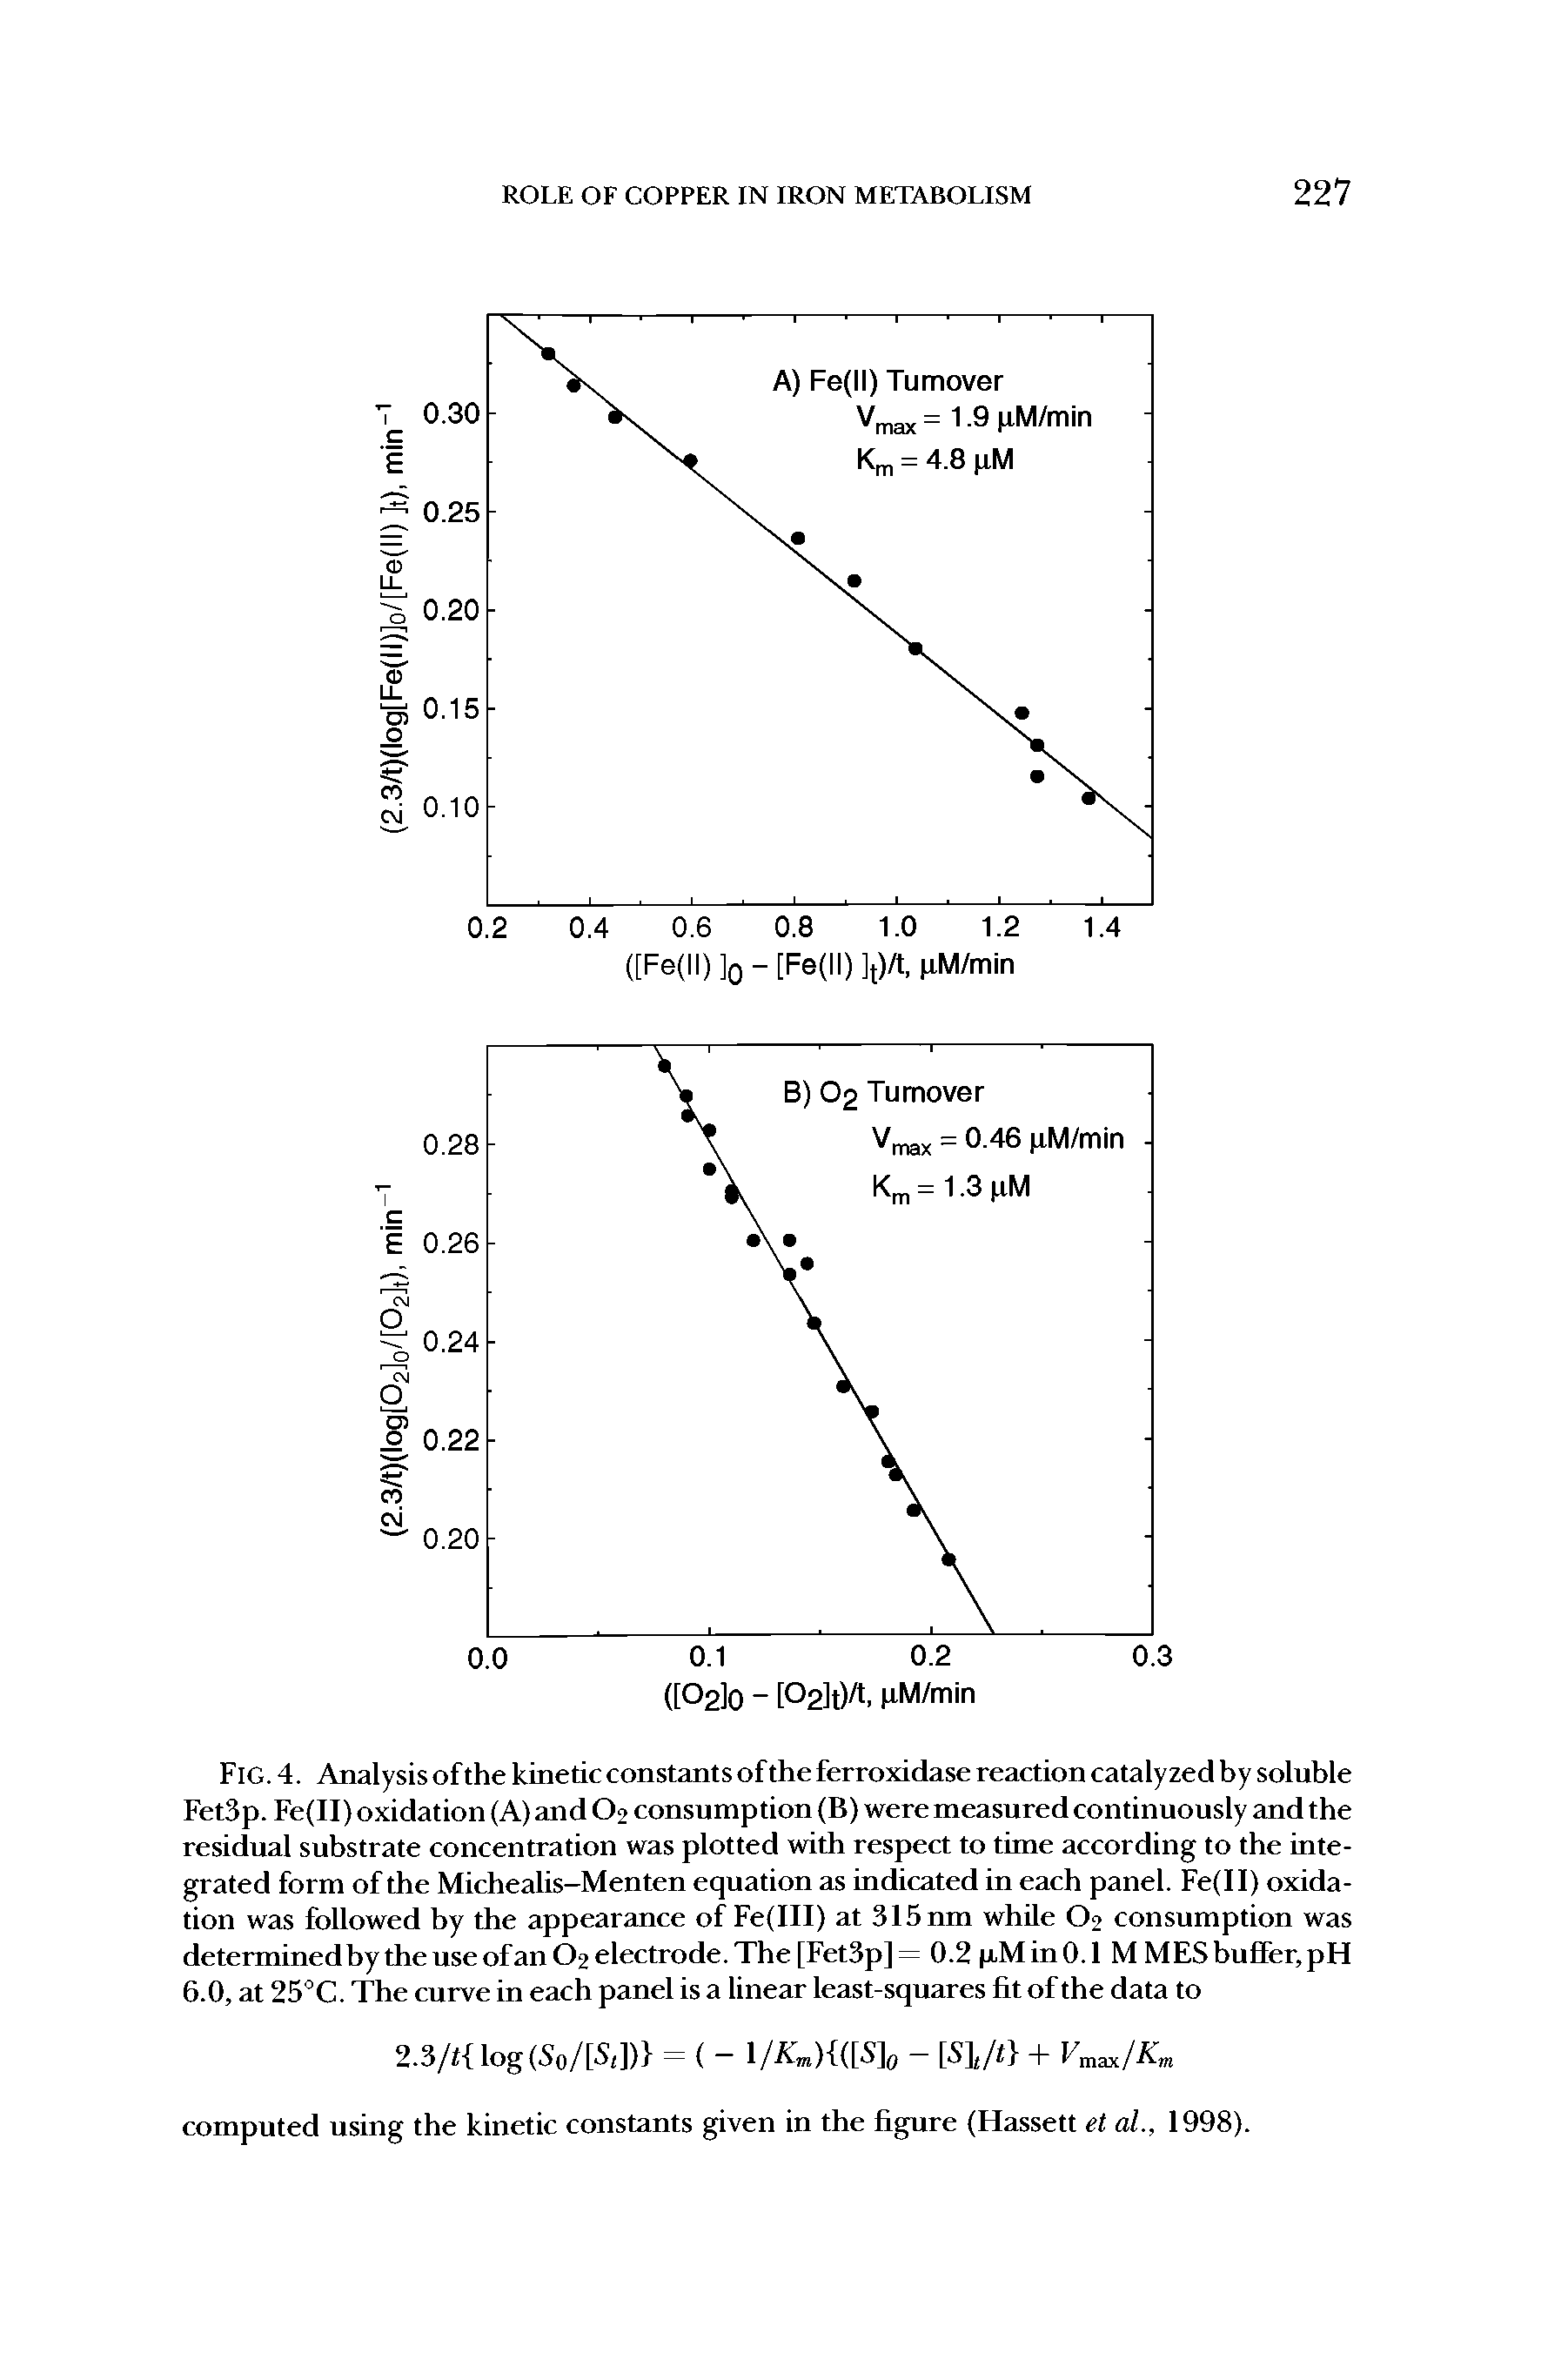 Fig. 4. Analysis of the kinetic constants of the ferroxidase reaction catalyzed by soluble Fet3p. Fe(II) oxidation (A) and O2 consumption (B) were measured continuously and the residual substrate concentration was plotted with respect to time according to the integrated form of the Michealis-Menten equation as indicated in each panel. Fe(II) oxidation was followed by the appearance of Fe(III) at 315 nm while O2 consumption was determinedby the use of an O2 electrode. The [Fet3p] =0.2 fcM in 0.1 M MES buffer, pH 6.0, at 25°C. The curve in each panel is a linear least-squares fit of the data to...